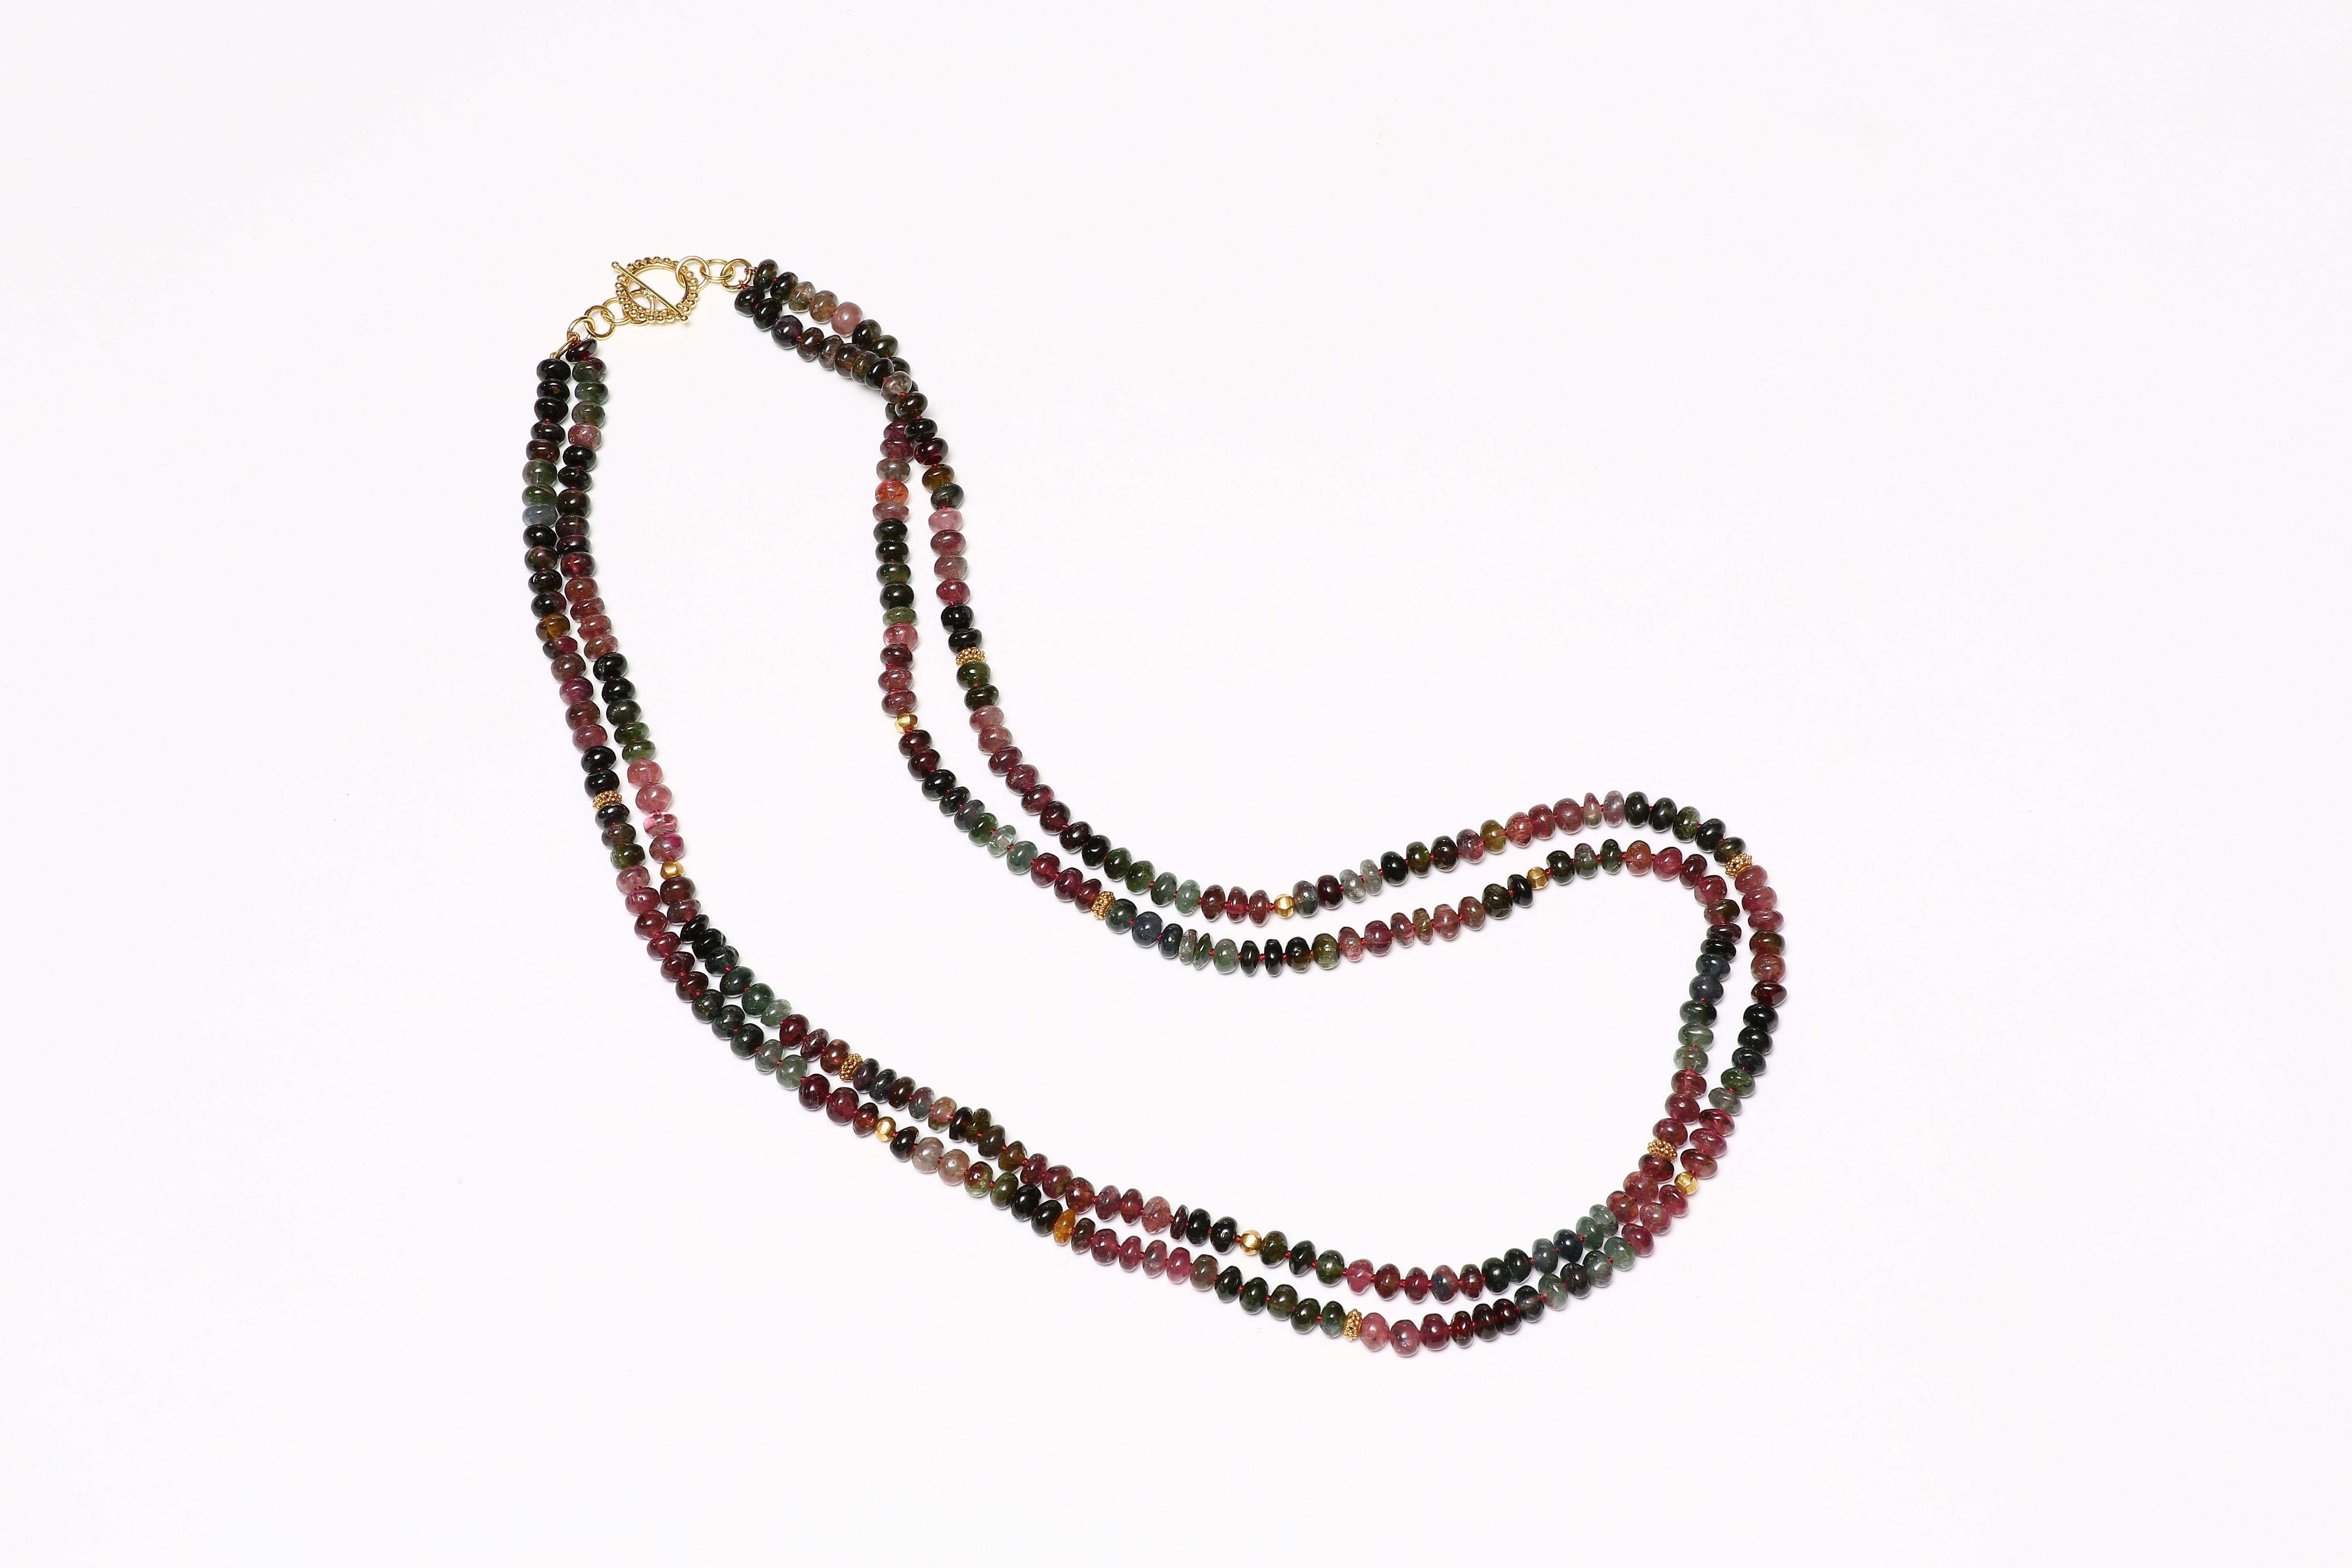 Bead Tourmaline Necklace For Sale